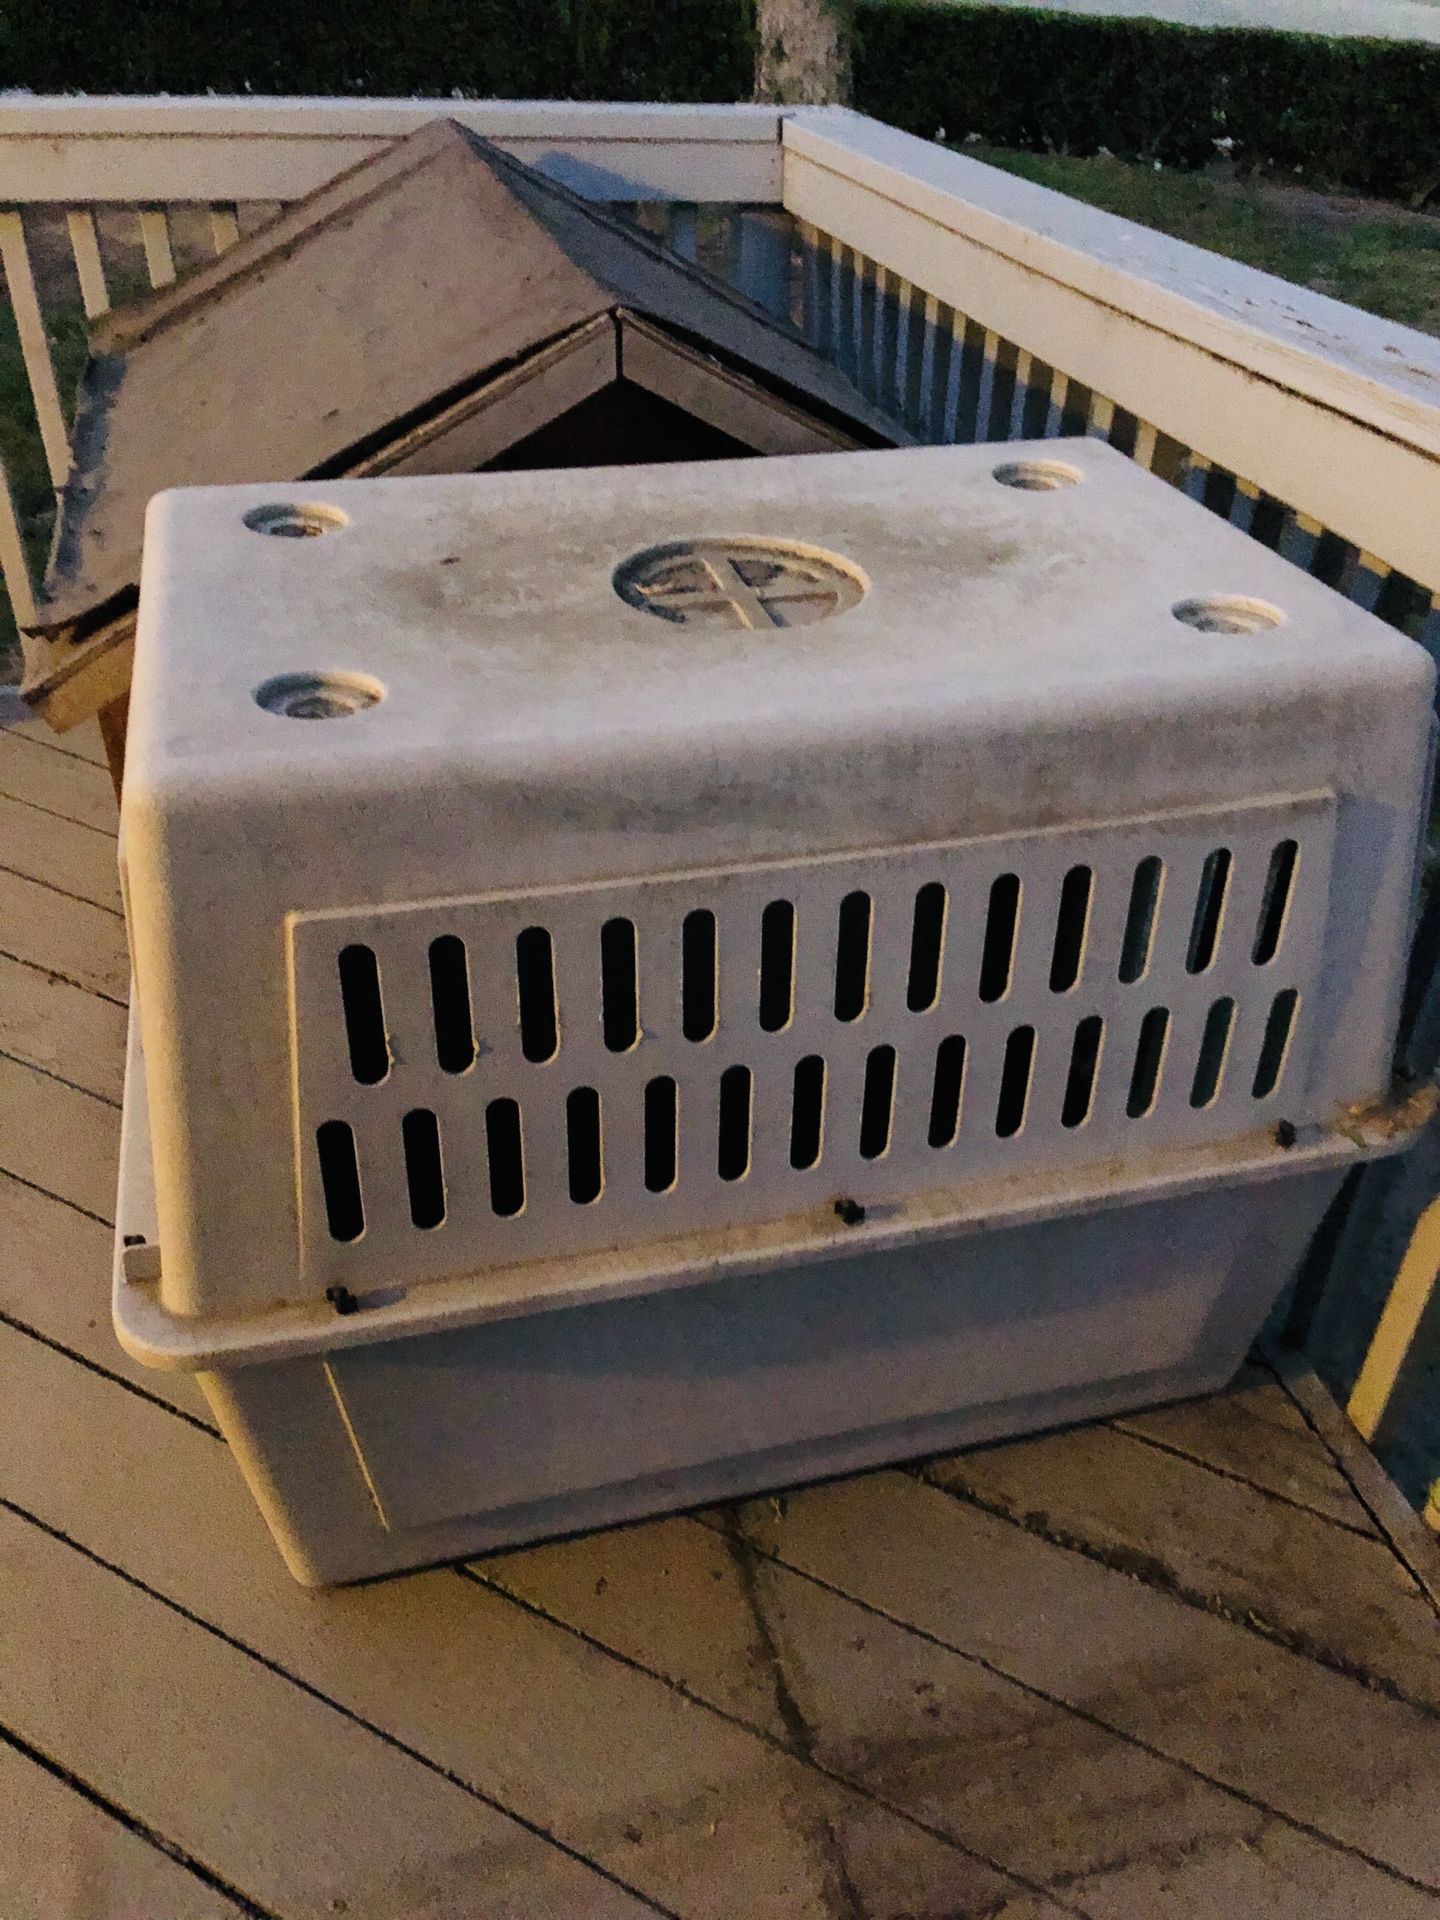 Dog House and portable traveling dog crate